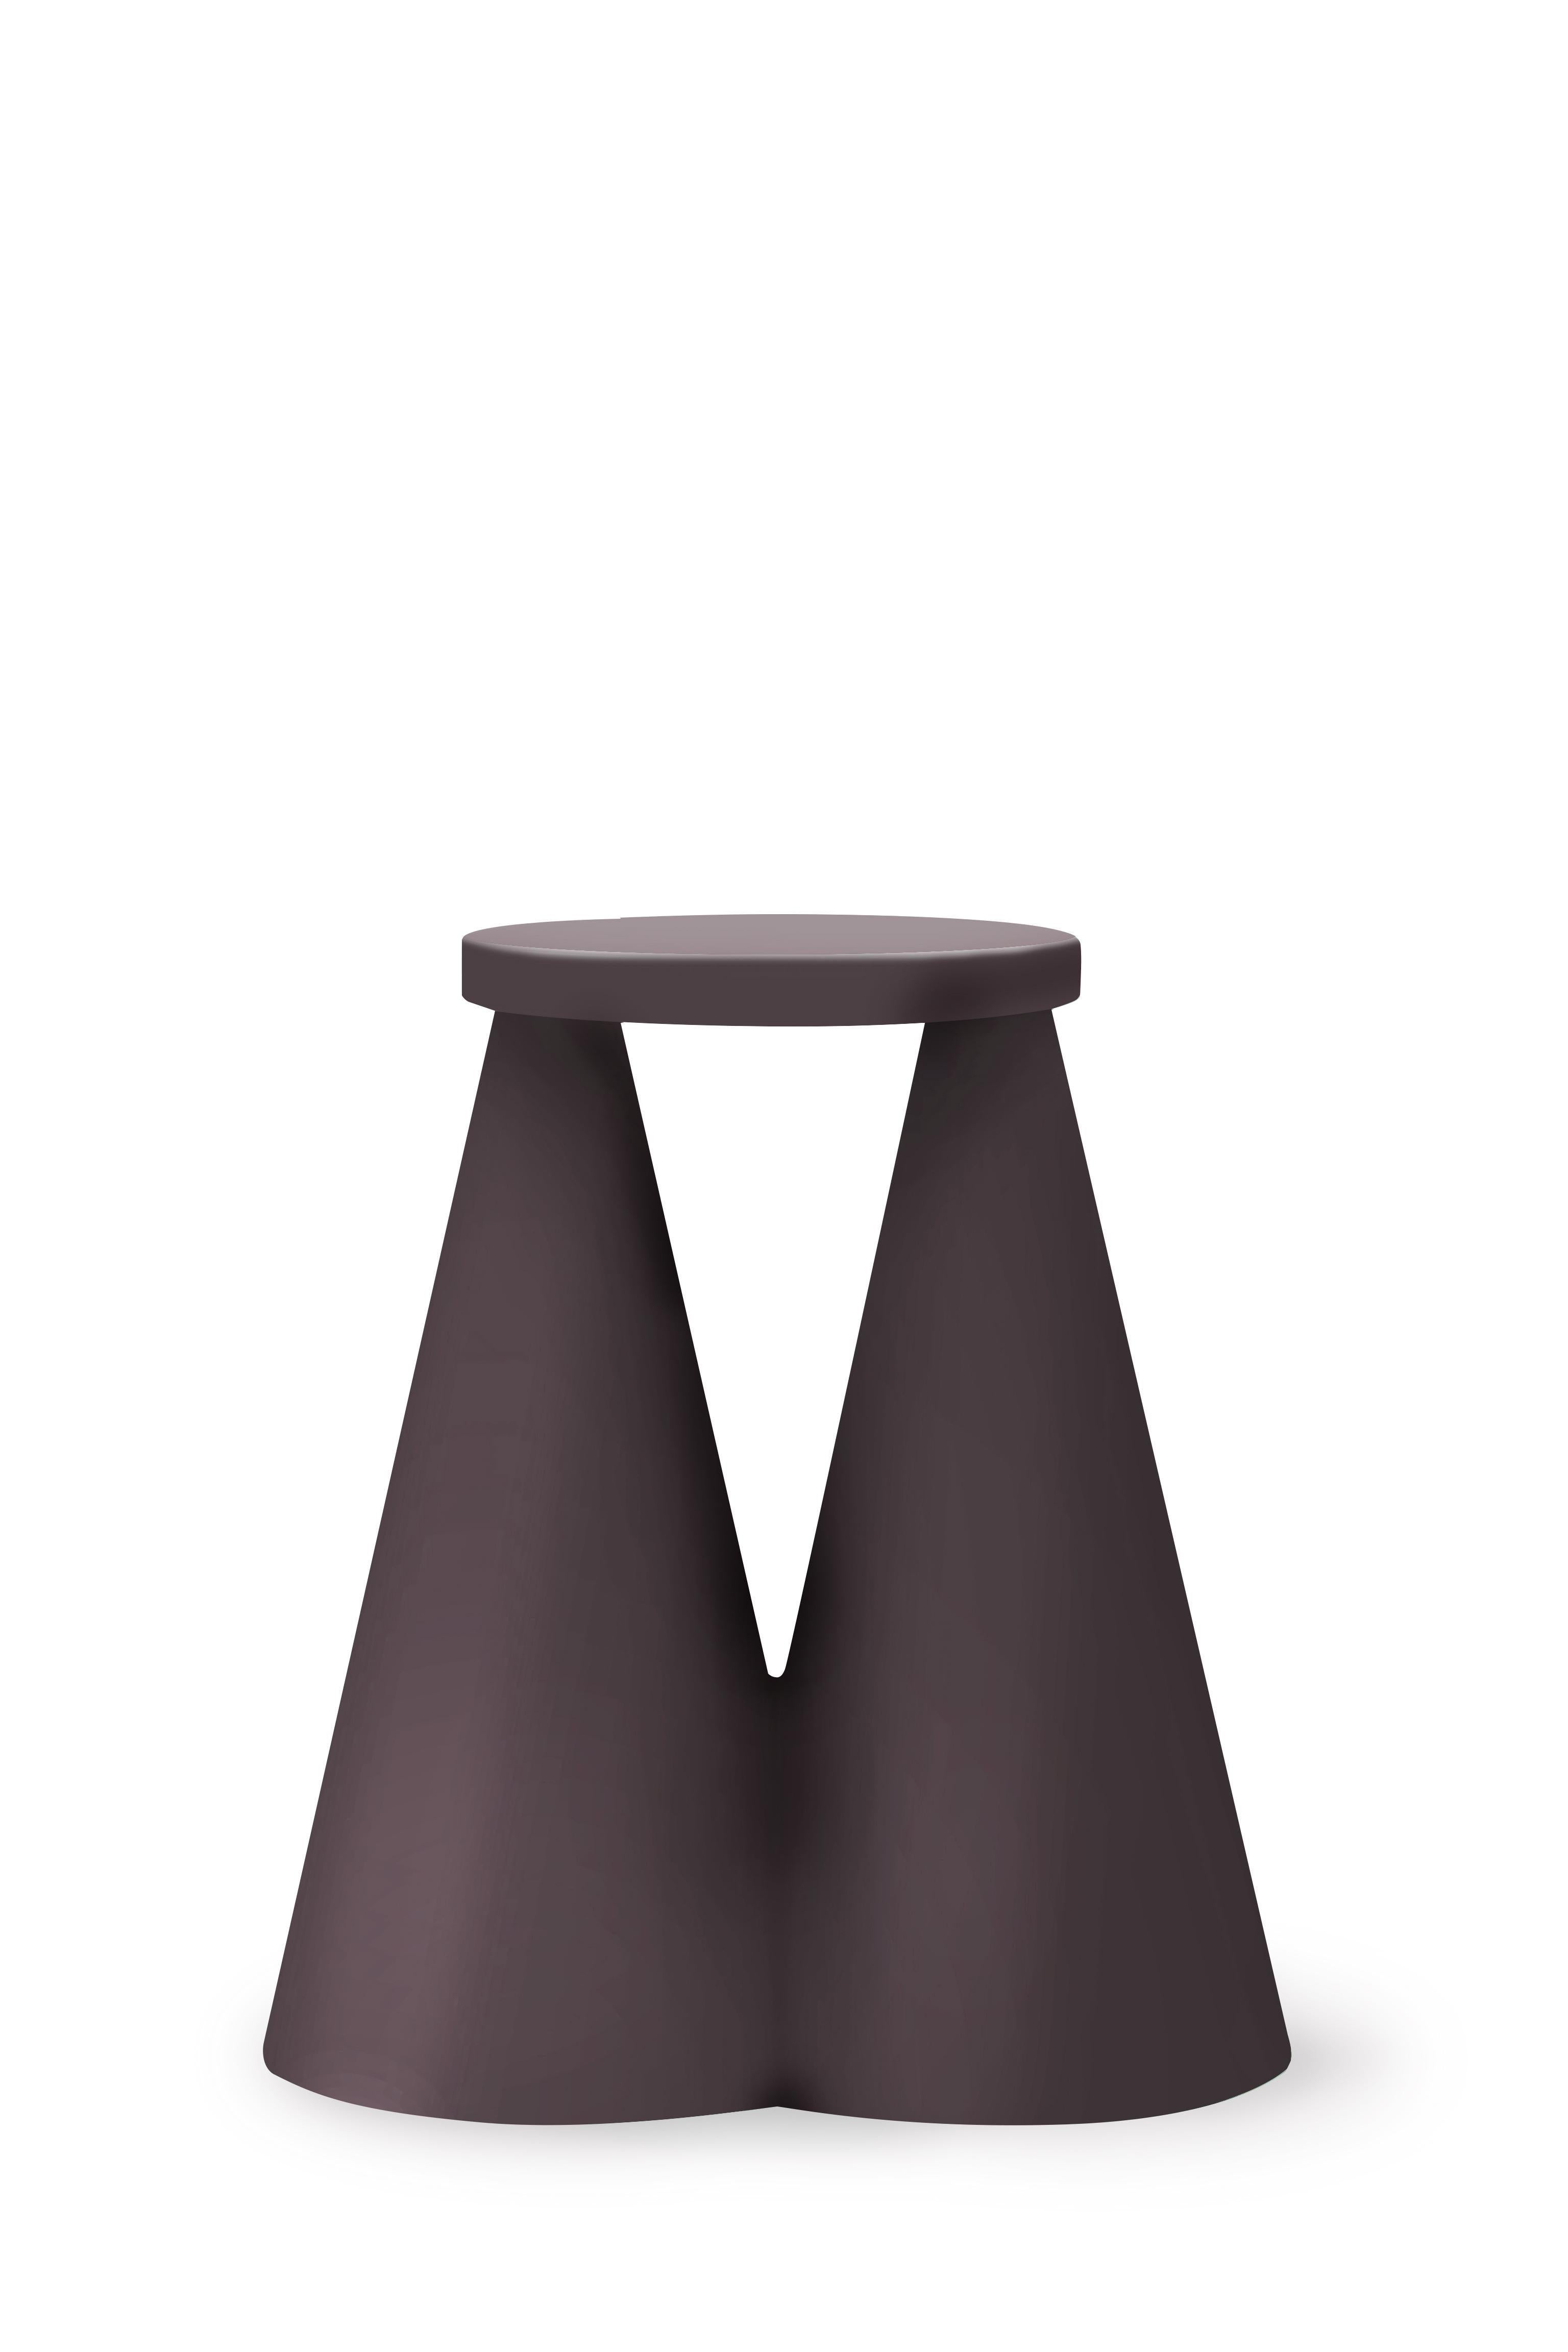 Modern Pair of Isola Side Table by Cara Davide